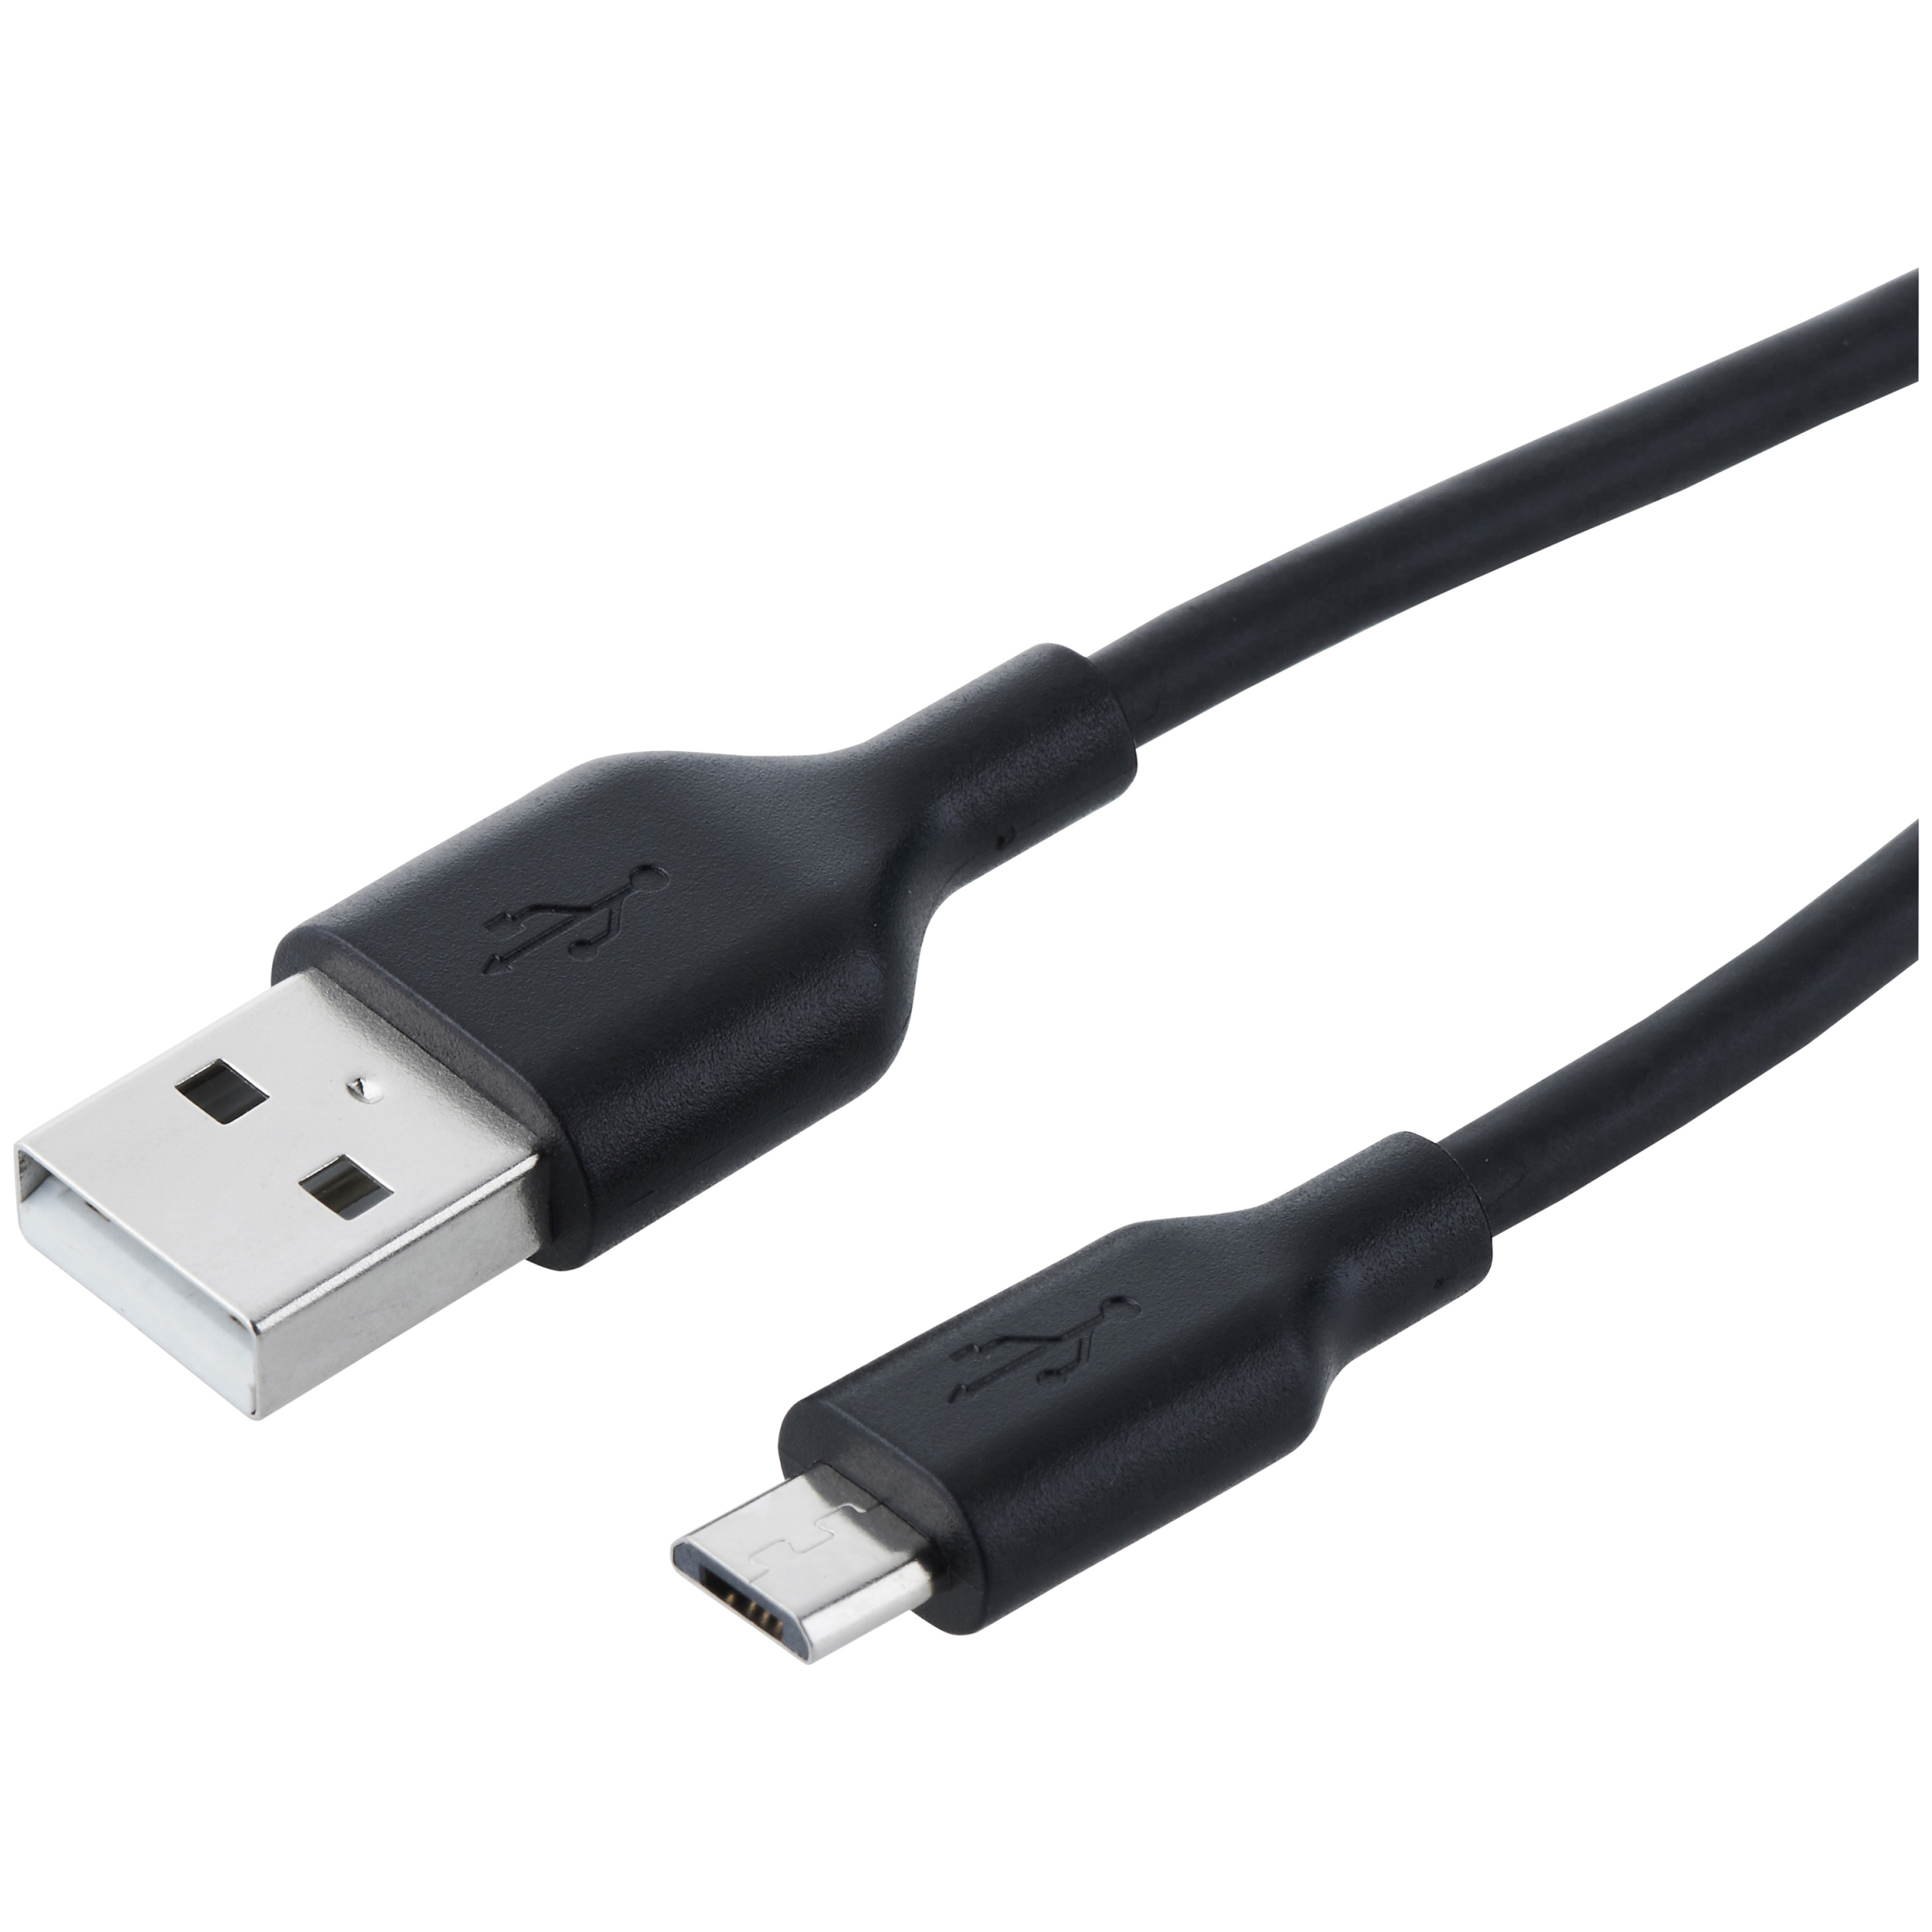 onn. 3-Foot Sync and Charge Cable with Micro USB Connector, High-Quality Construction - image 1 of 5